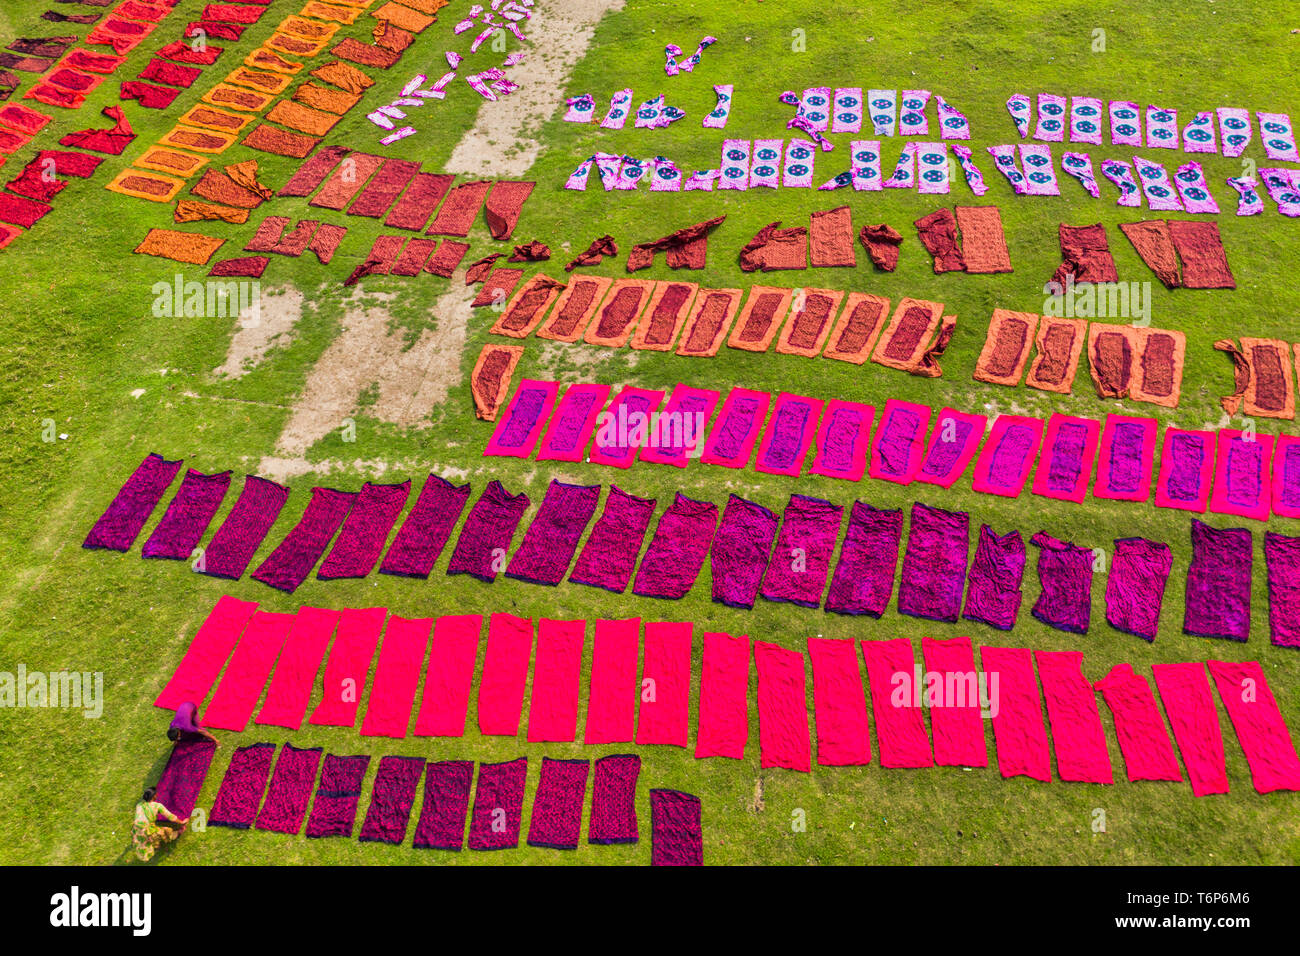 (EDITORS NOTE: Image taken with drone) Workers seen unfolding hundreds of meters of freshly dyed bright red cloth across a field as part of the process of creating traditional Batik.  In this techniques wax is used to create stunning patterns on a huge scale. The wax prevents the dye from penetrating the area it is placed on, allowing workers to create amazingly complex multi-coloured designs. They then soak the cloth in a dying emulsion before rolling the large cotton, silk, or wool cloths in the hot sun to dry. Stock Photo